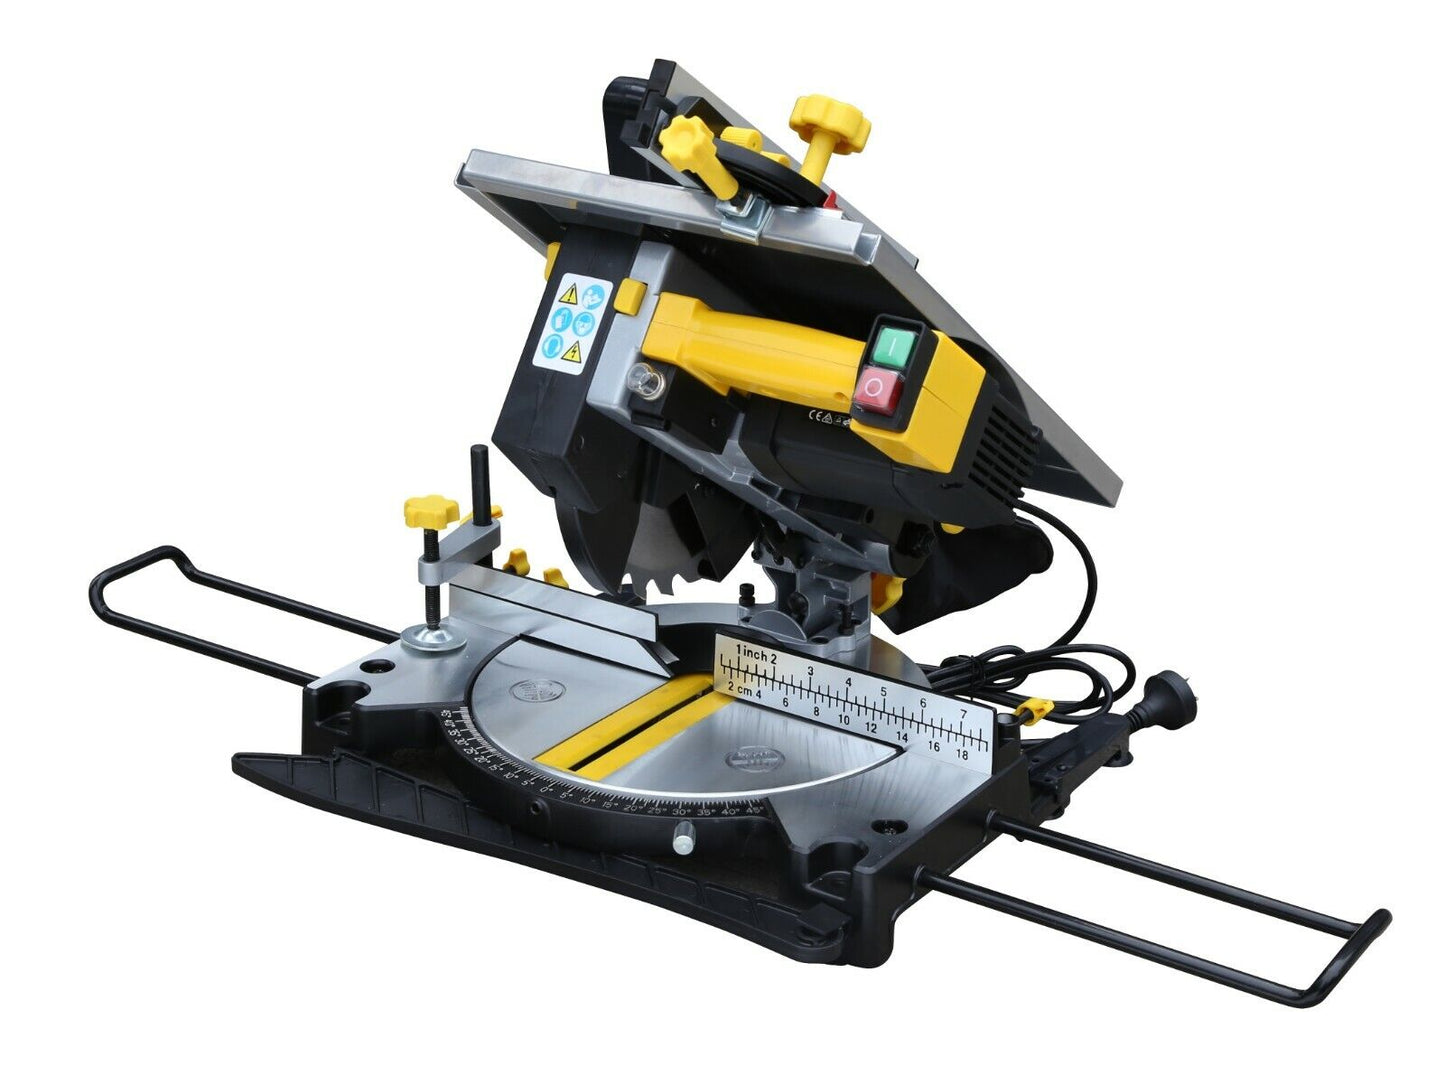 PRO Mitre Saw Table Saw Combo Electric Bench Drop Saw Extension 210mm 2 in 1